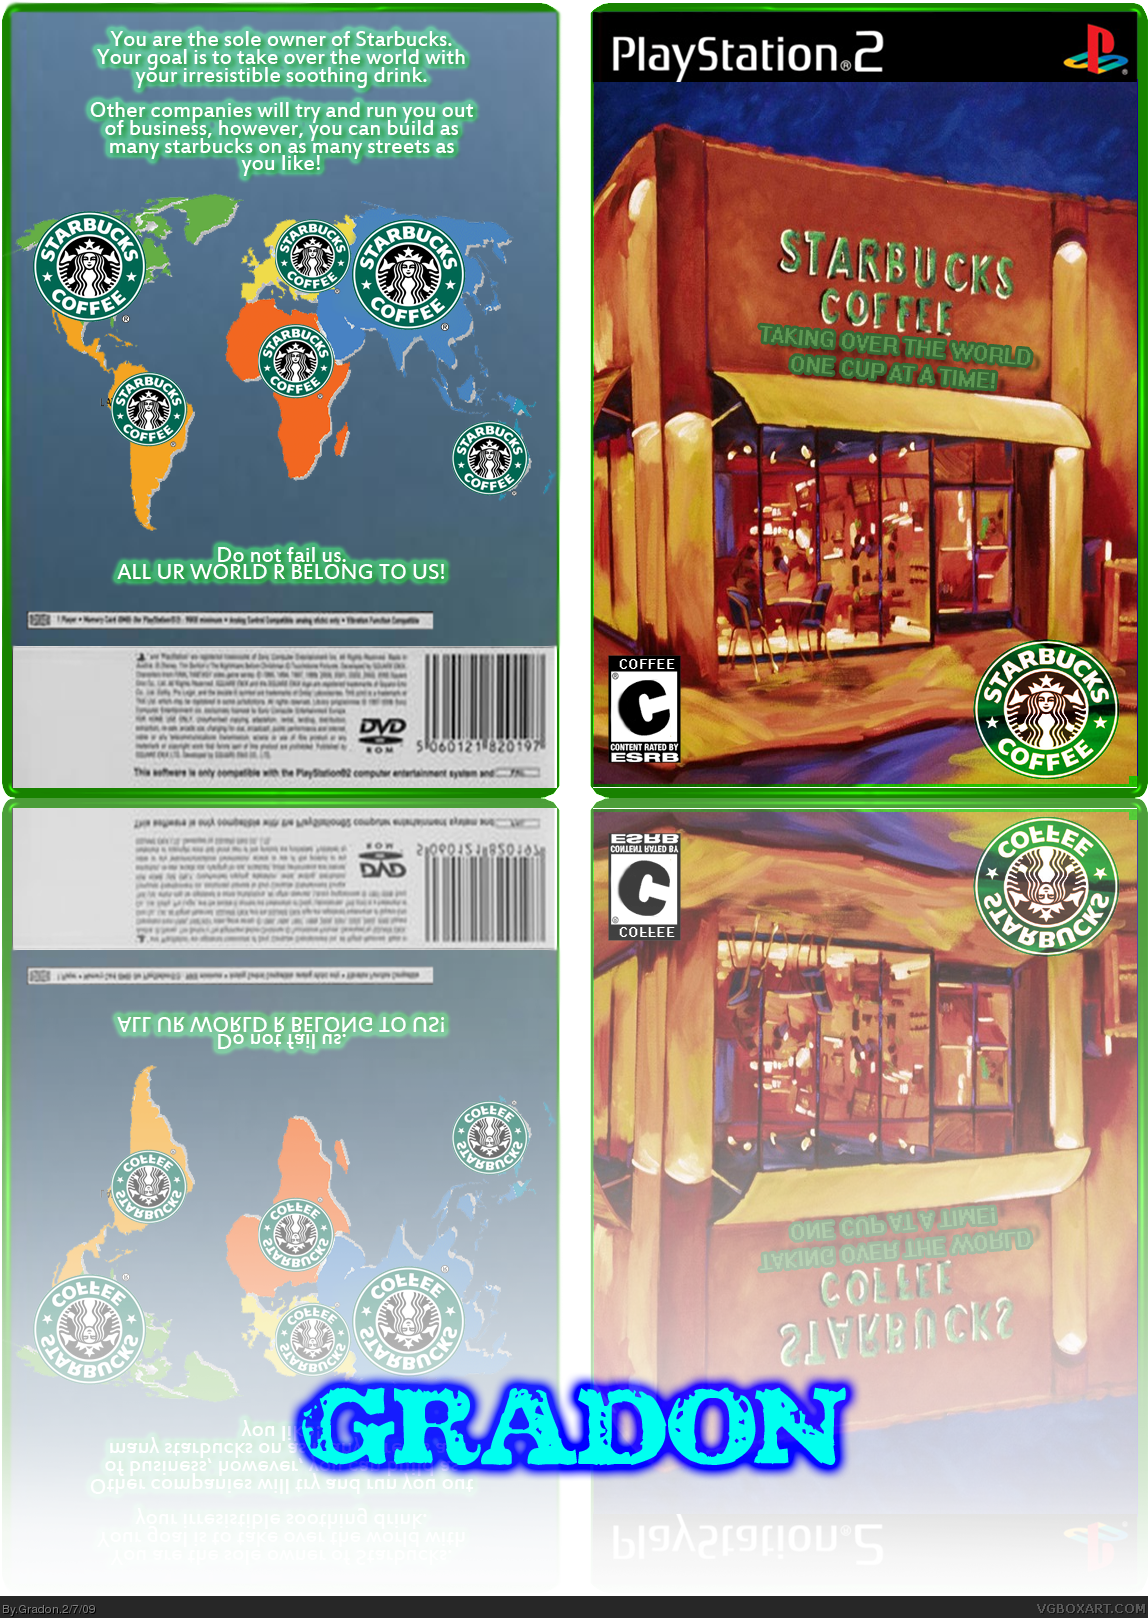 StarBucks Coffee: The Game box cover